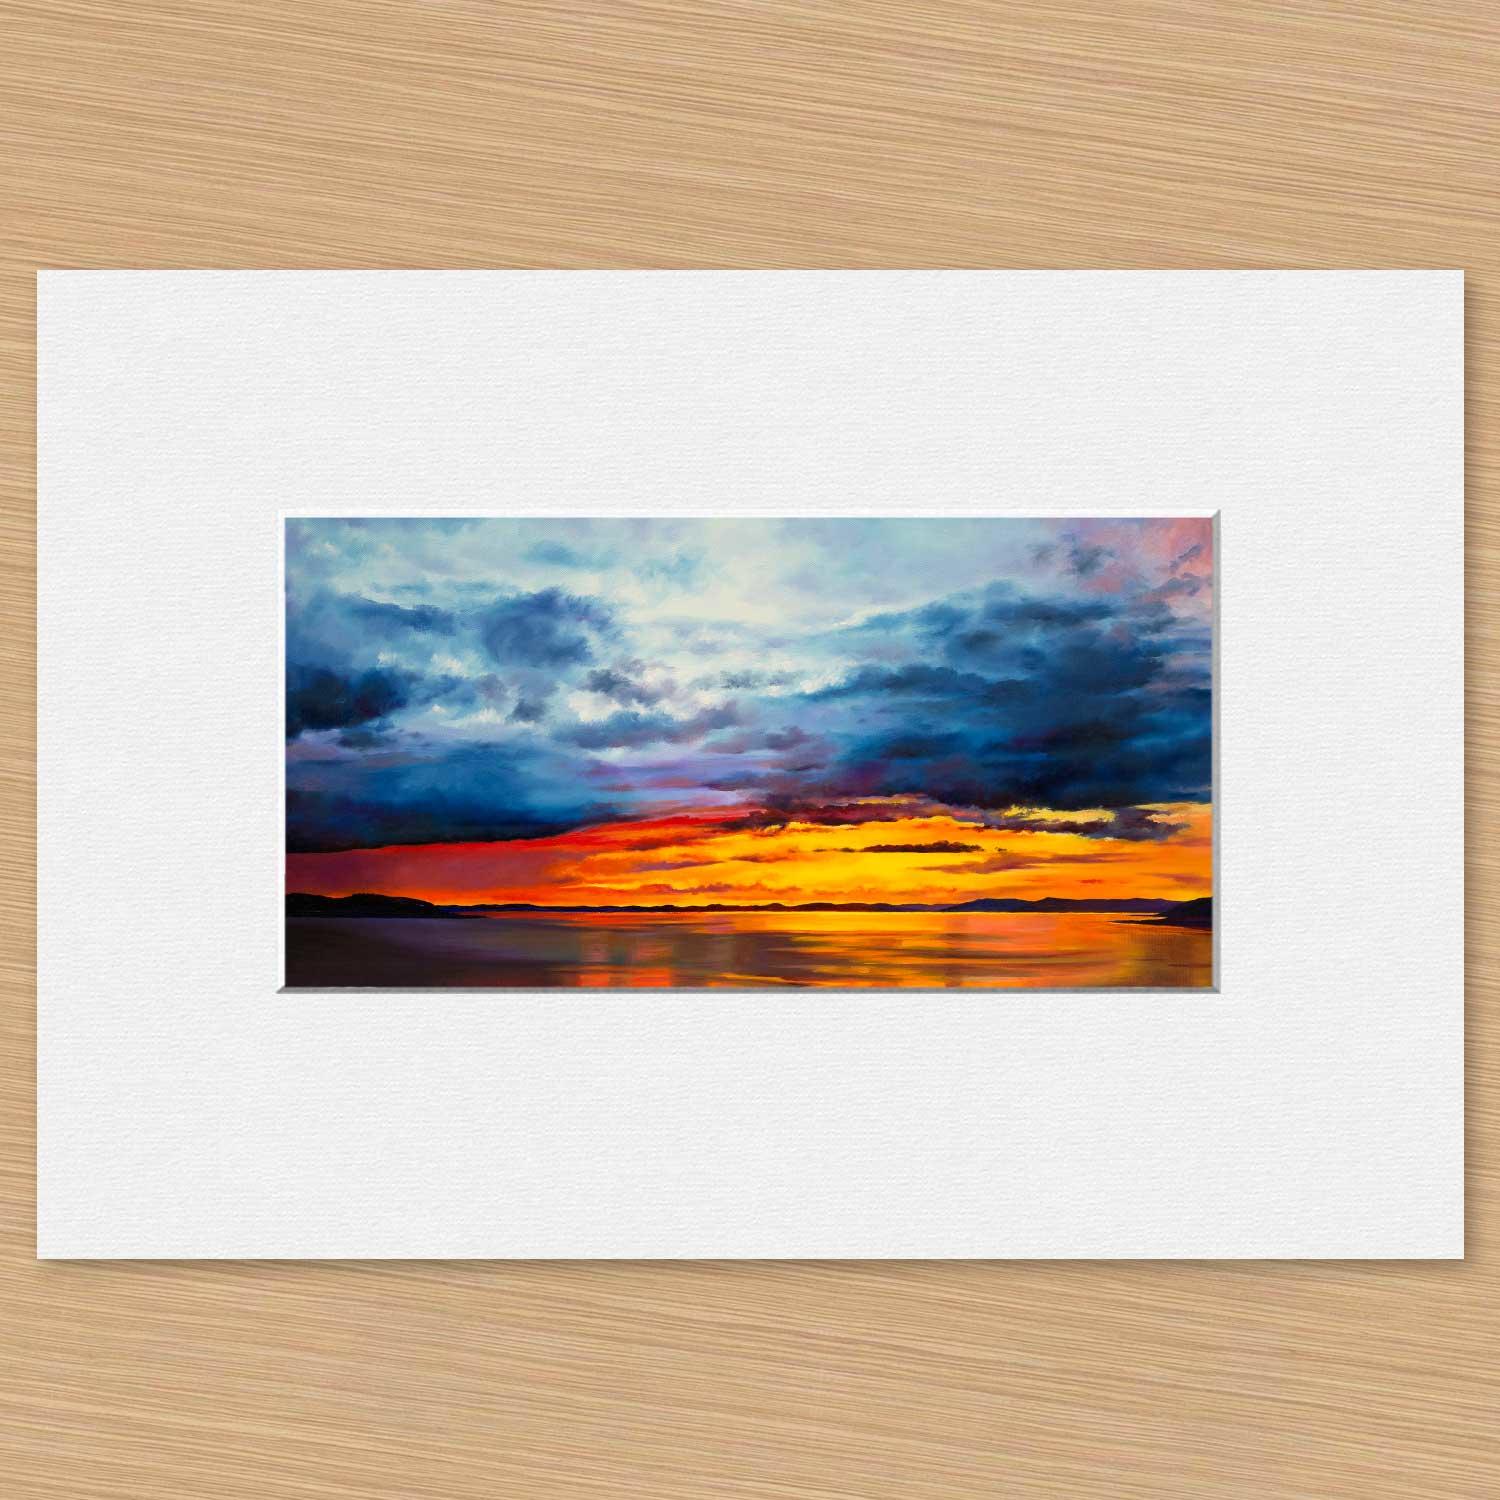 West Coast Sunset Mounted Card from an original painting by artist Scott McGregor